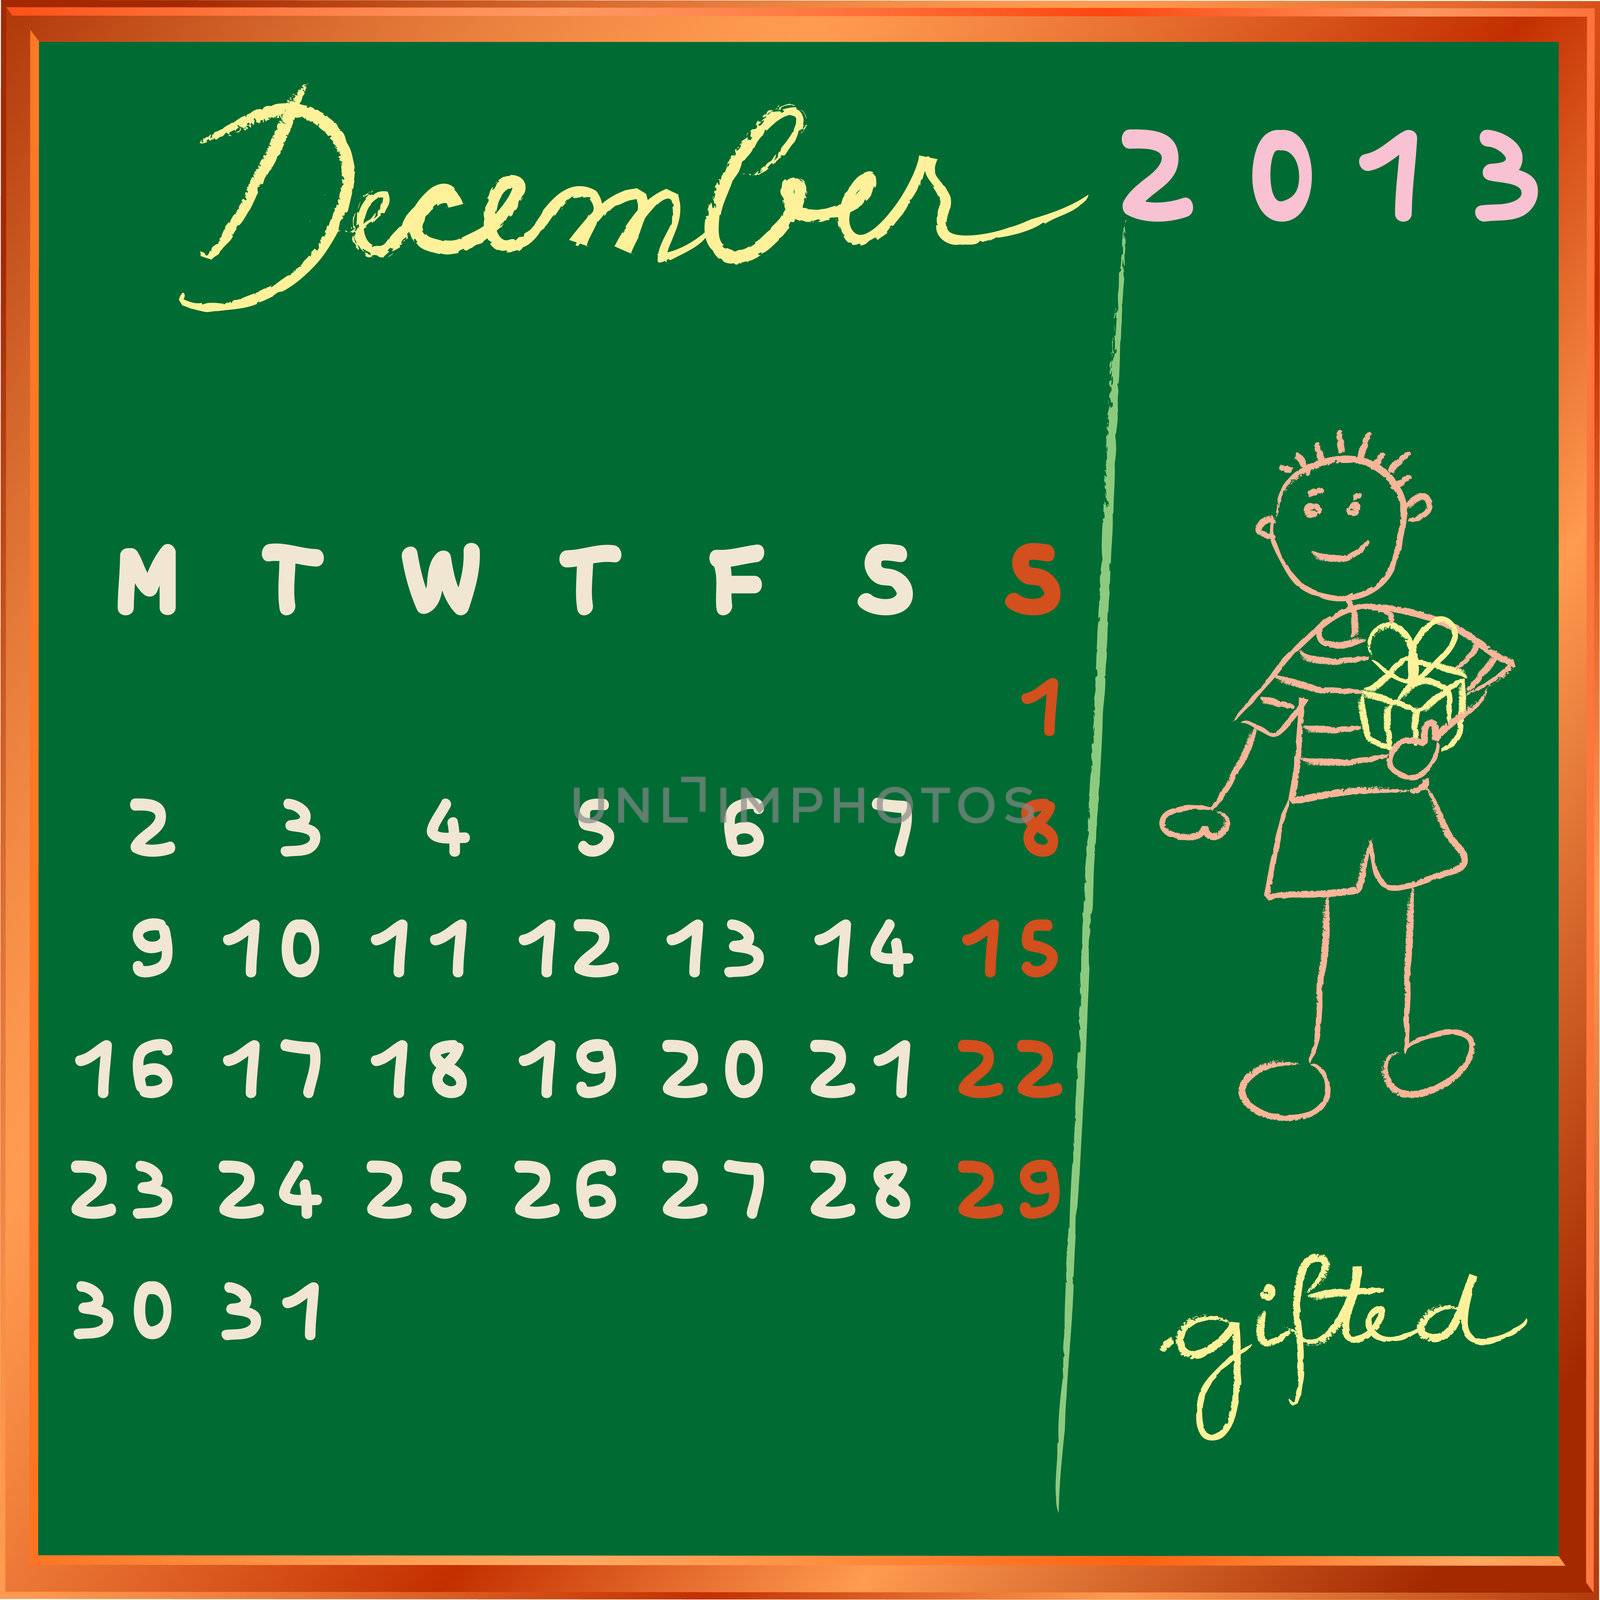 2013 calendar on a chalkboard, december design with the gifted student profile for international schools